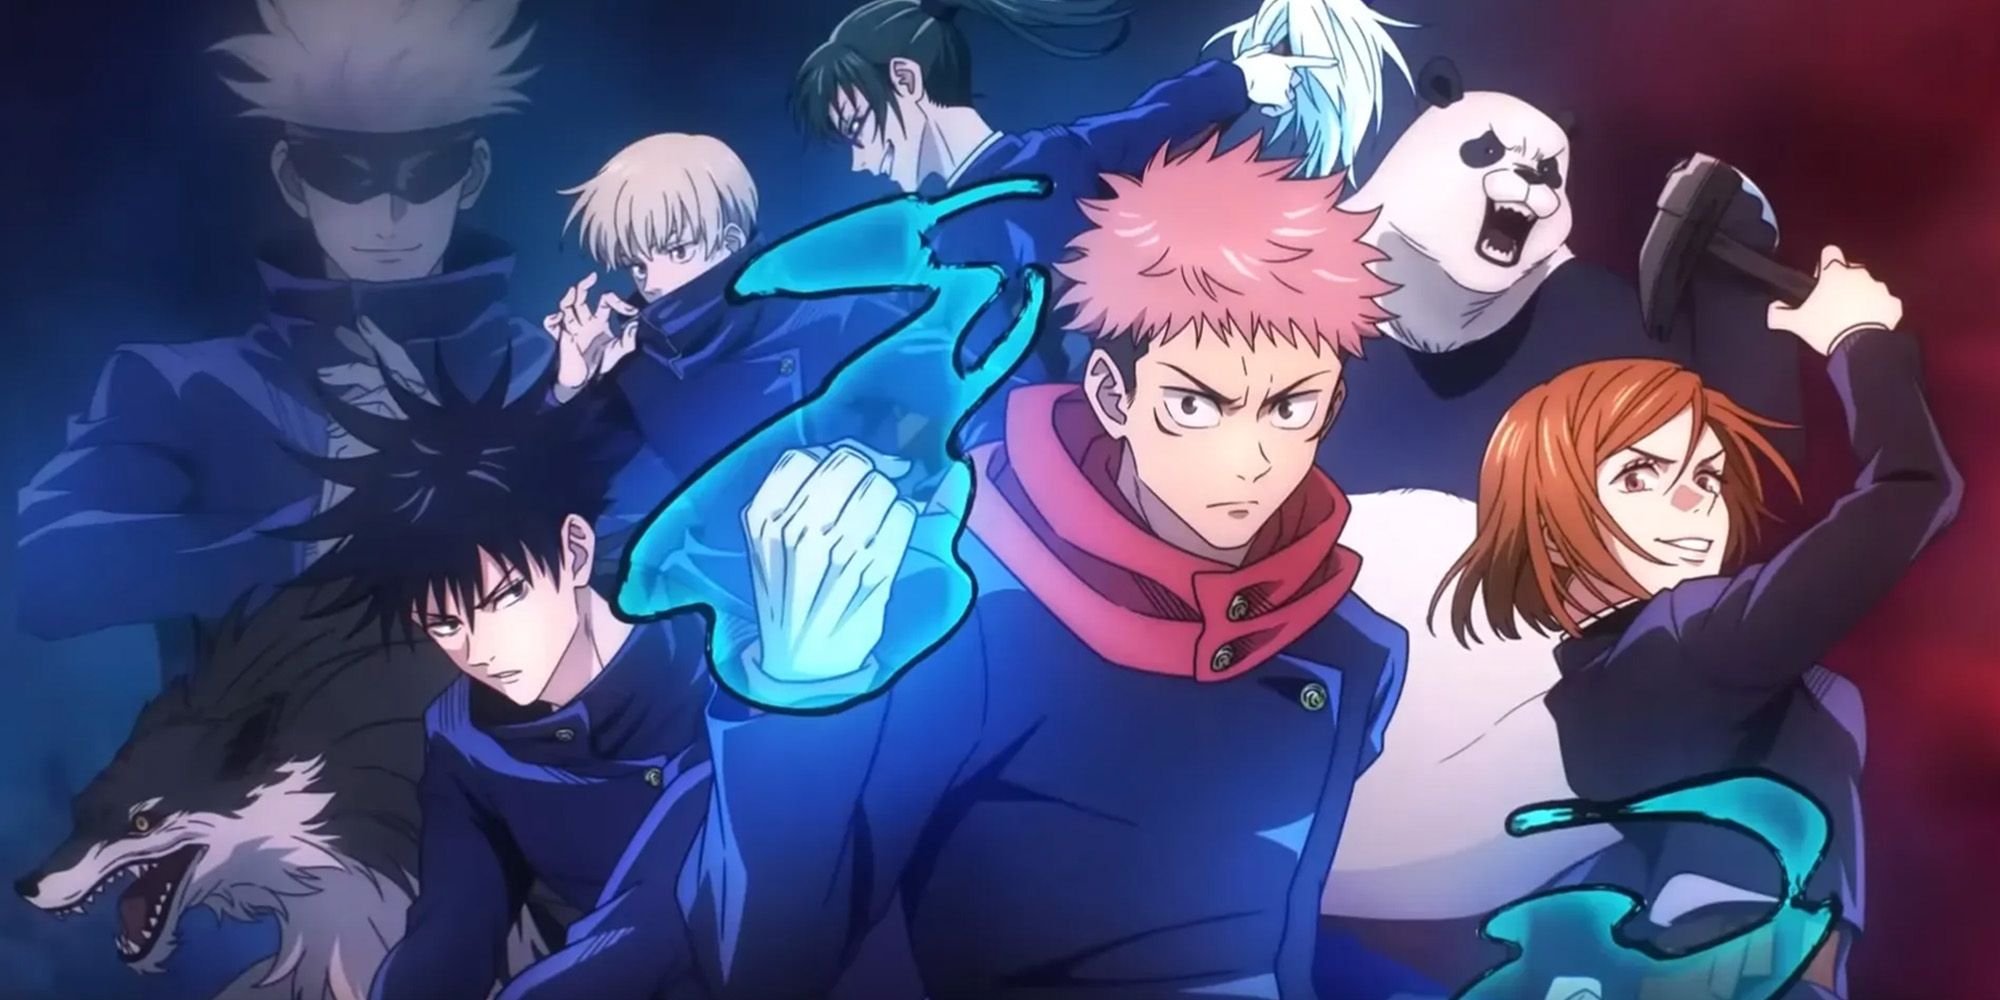 Jujutsu Kaisen - Promo Image Showing All The First And Second Years At Jujutsu High